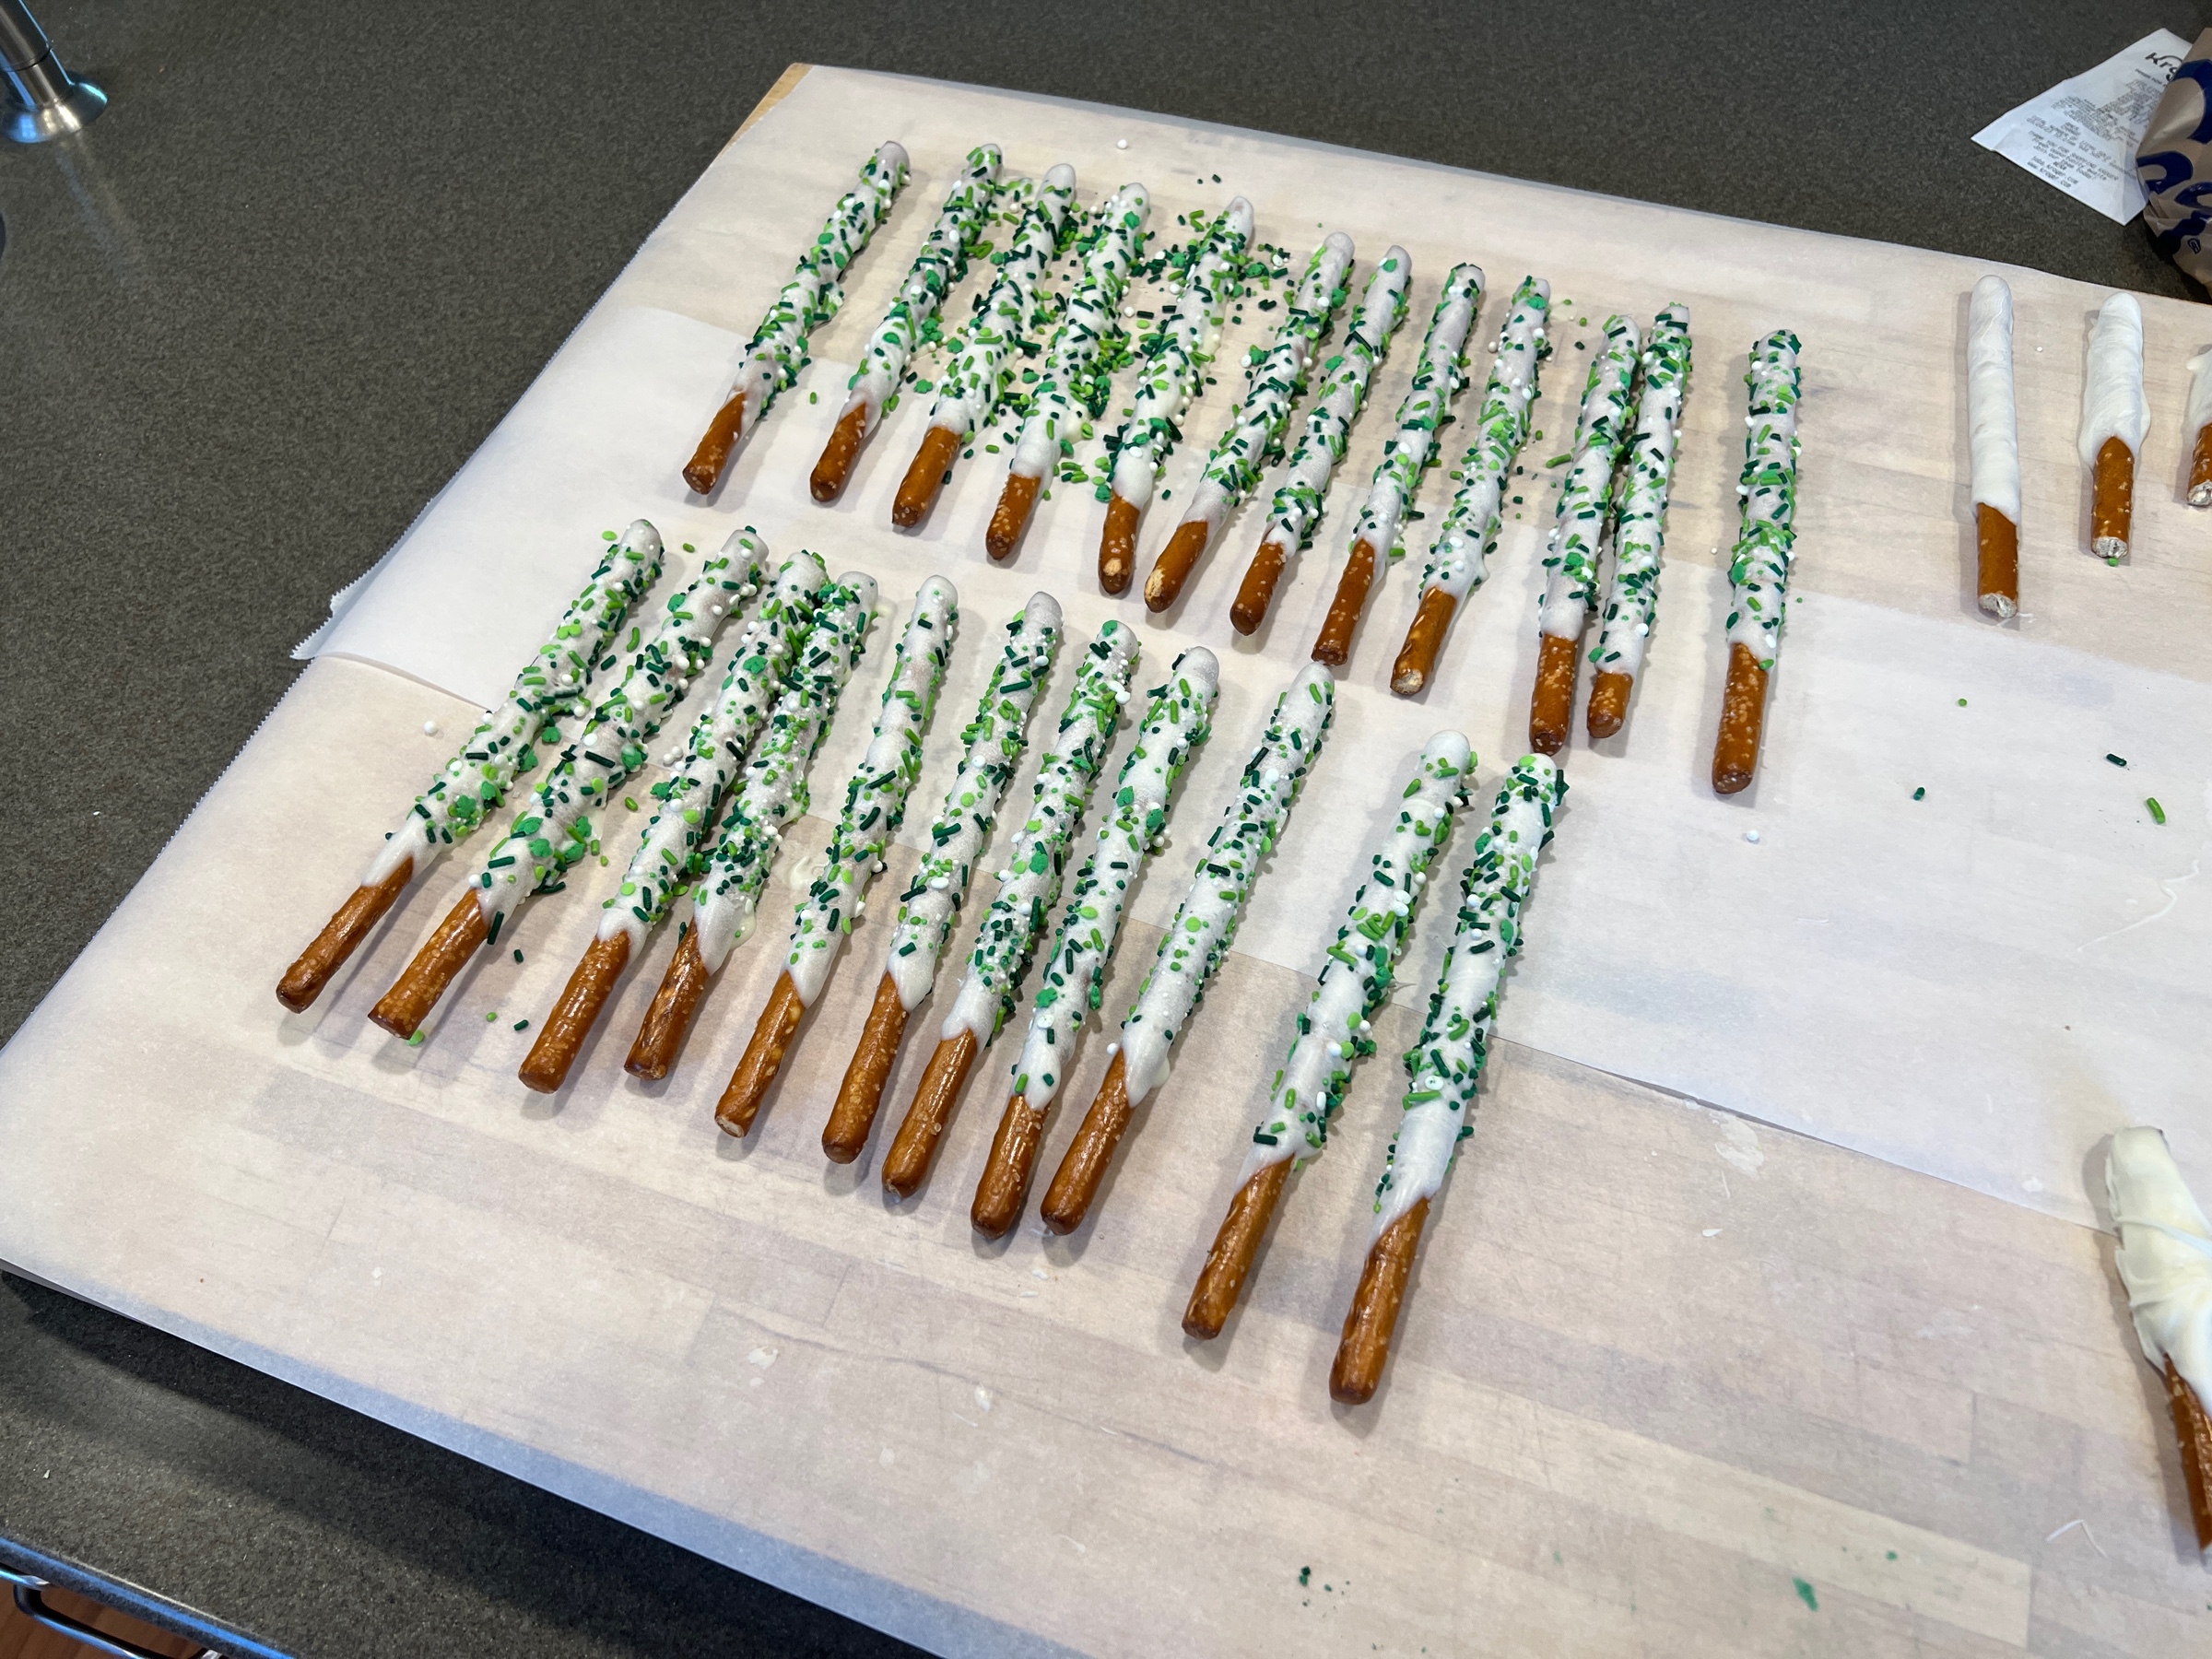 Pretzel rods, dipped in white chocolate and decorated with green sprinkles, cooling on parchment paper. At the edge of the photo are a few broken pretzel rods, dipped in white chocolate, but undecorated.